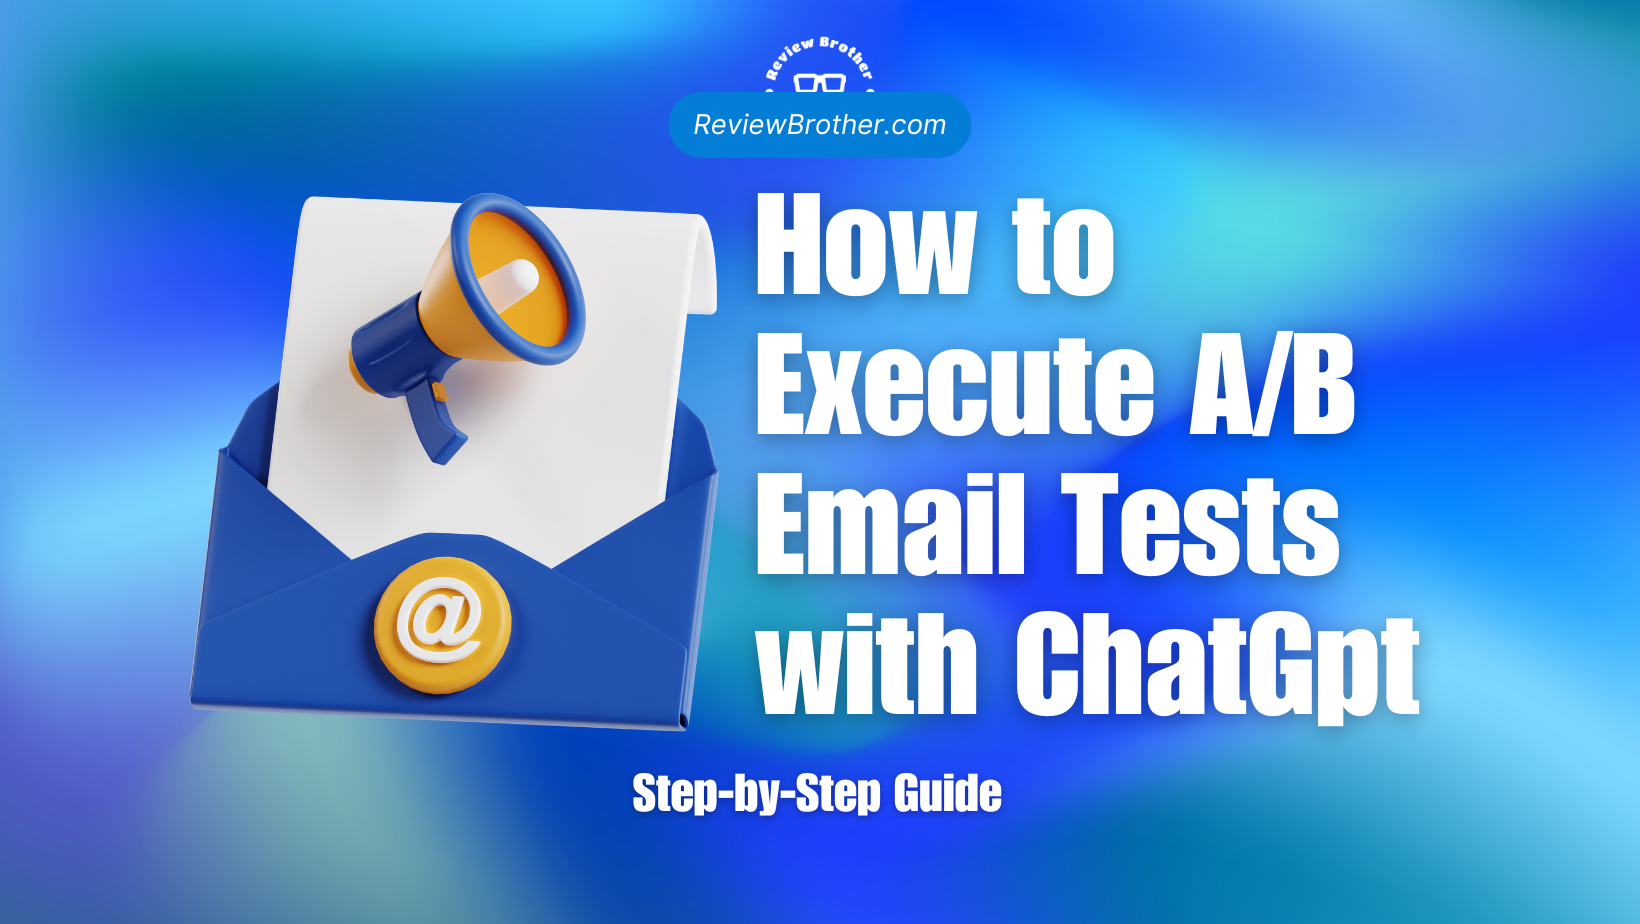 Step-by-Step: How to Execute A/B Email Tests with ChatGpt